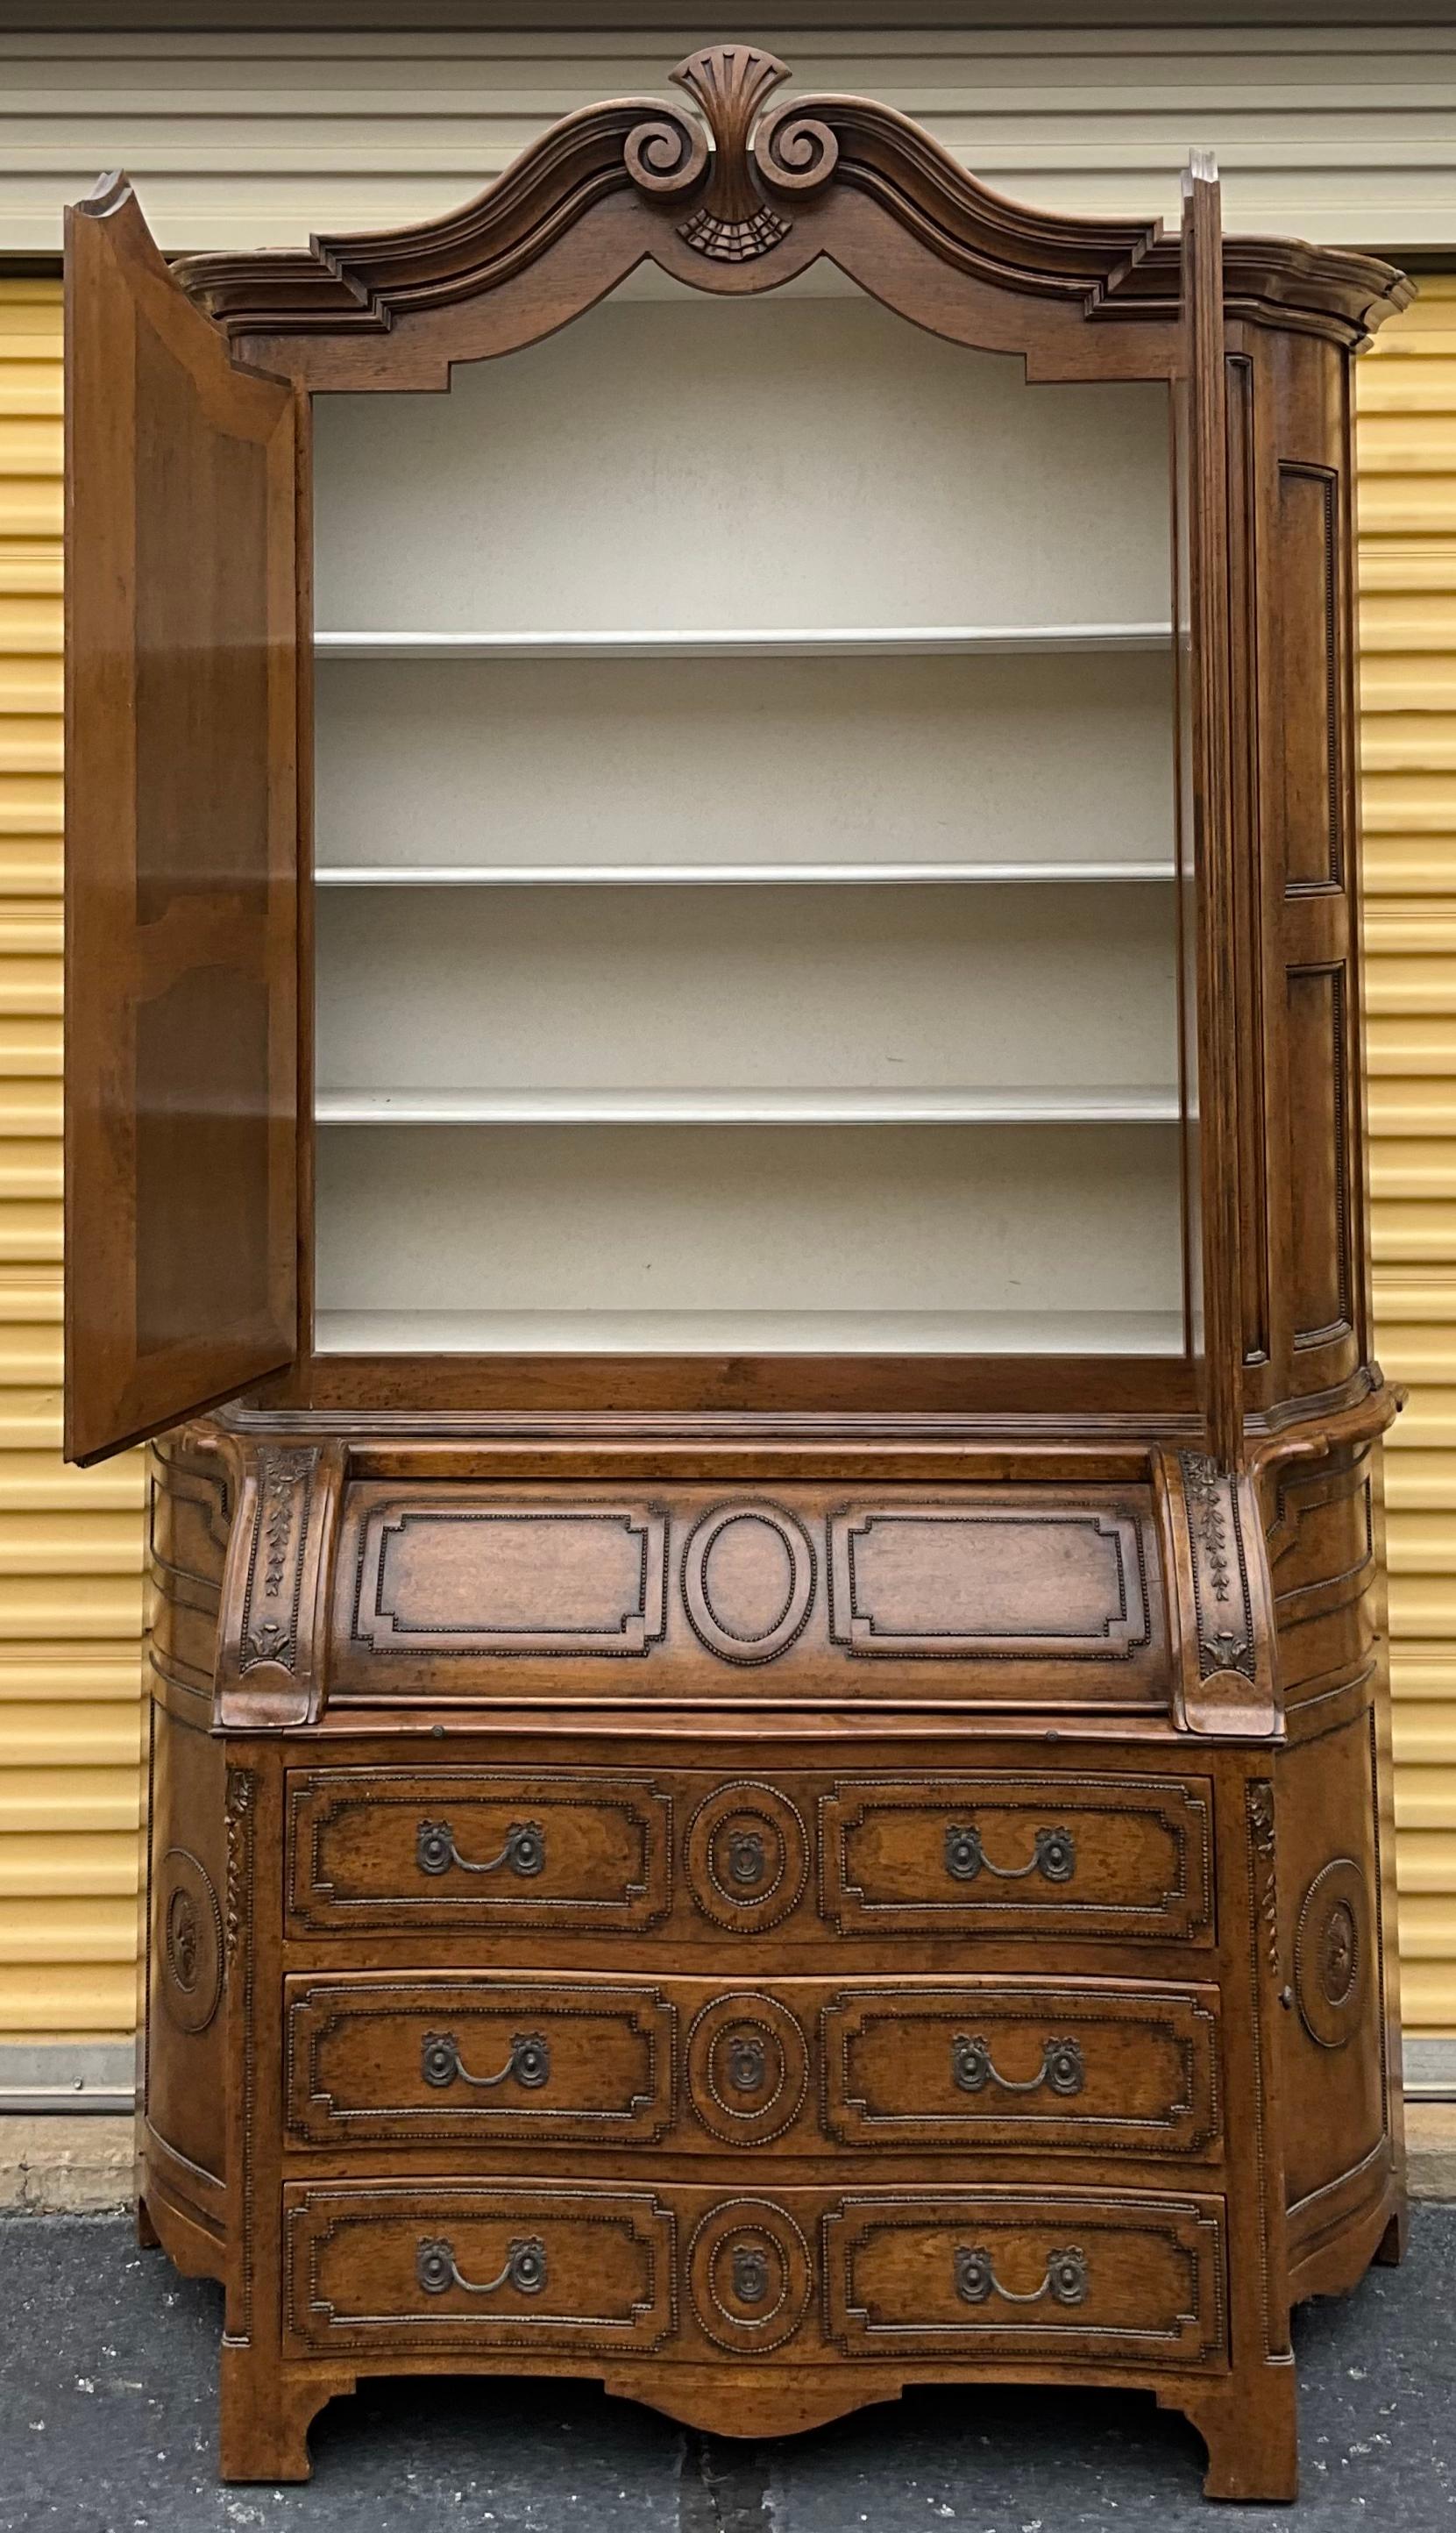 This is a show stopper! It is a large scale French style carved fruitwood Secretary by Dennis & Leen. It has an antique white painted interior as well as an incredible amount of storage. The writing surface draws out from the base and provides a